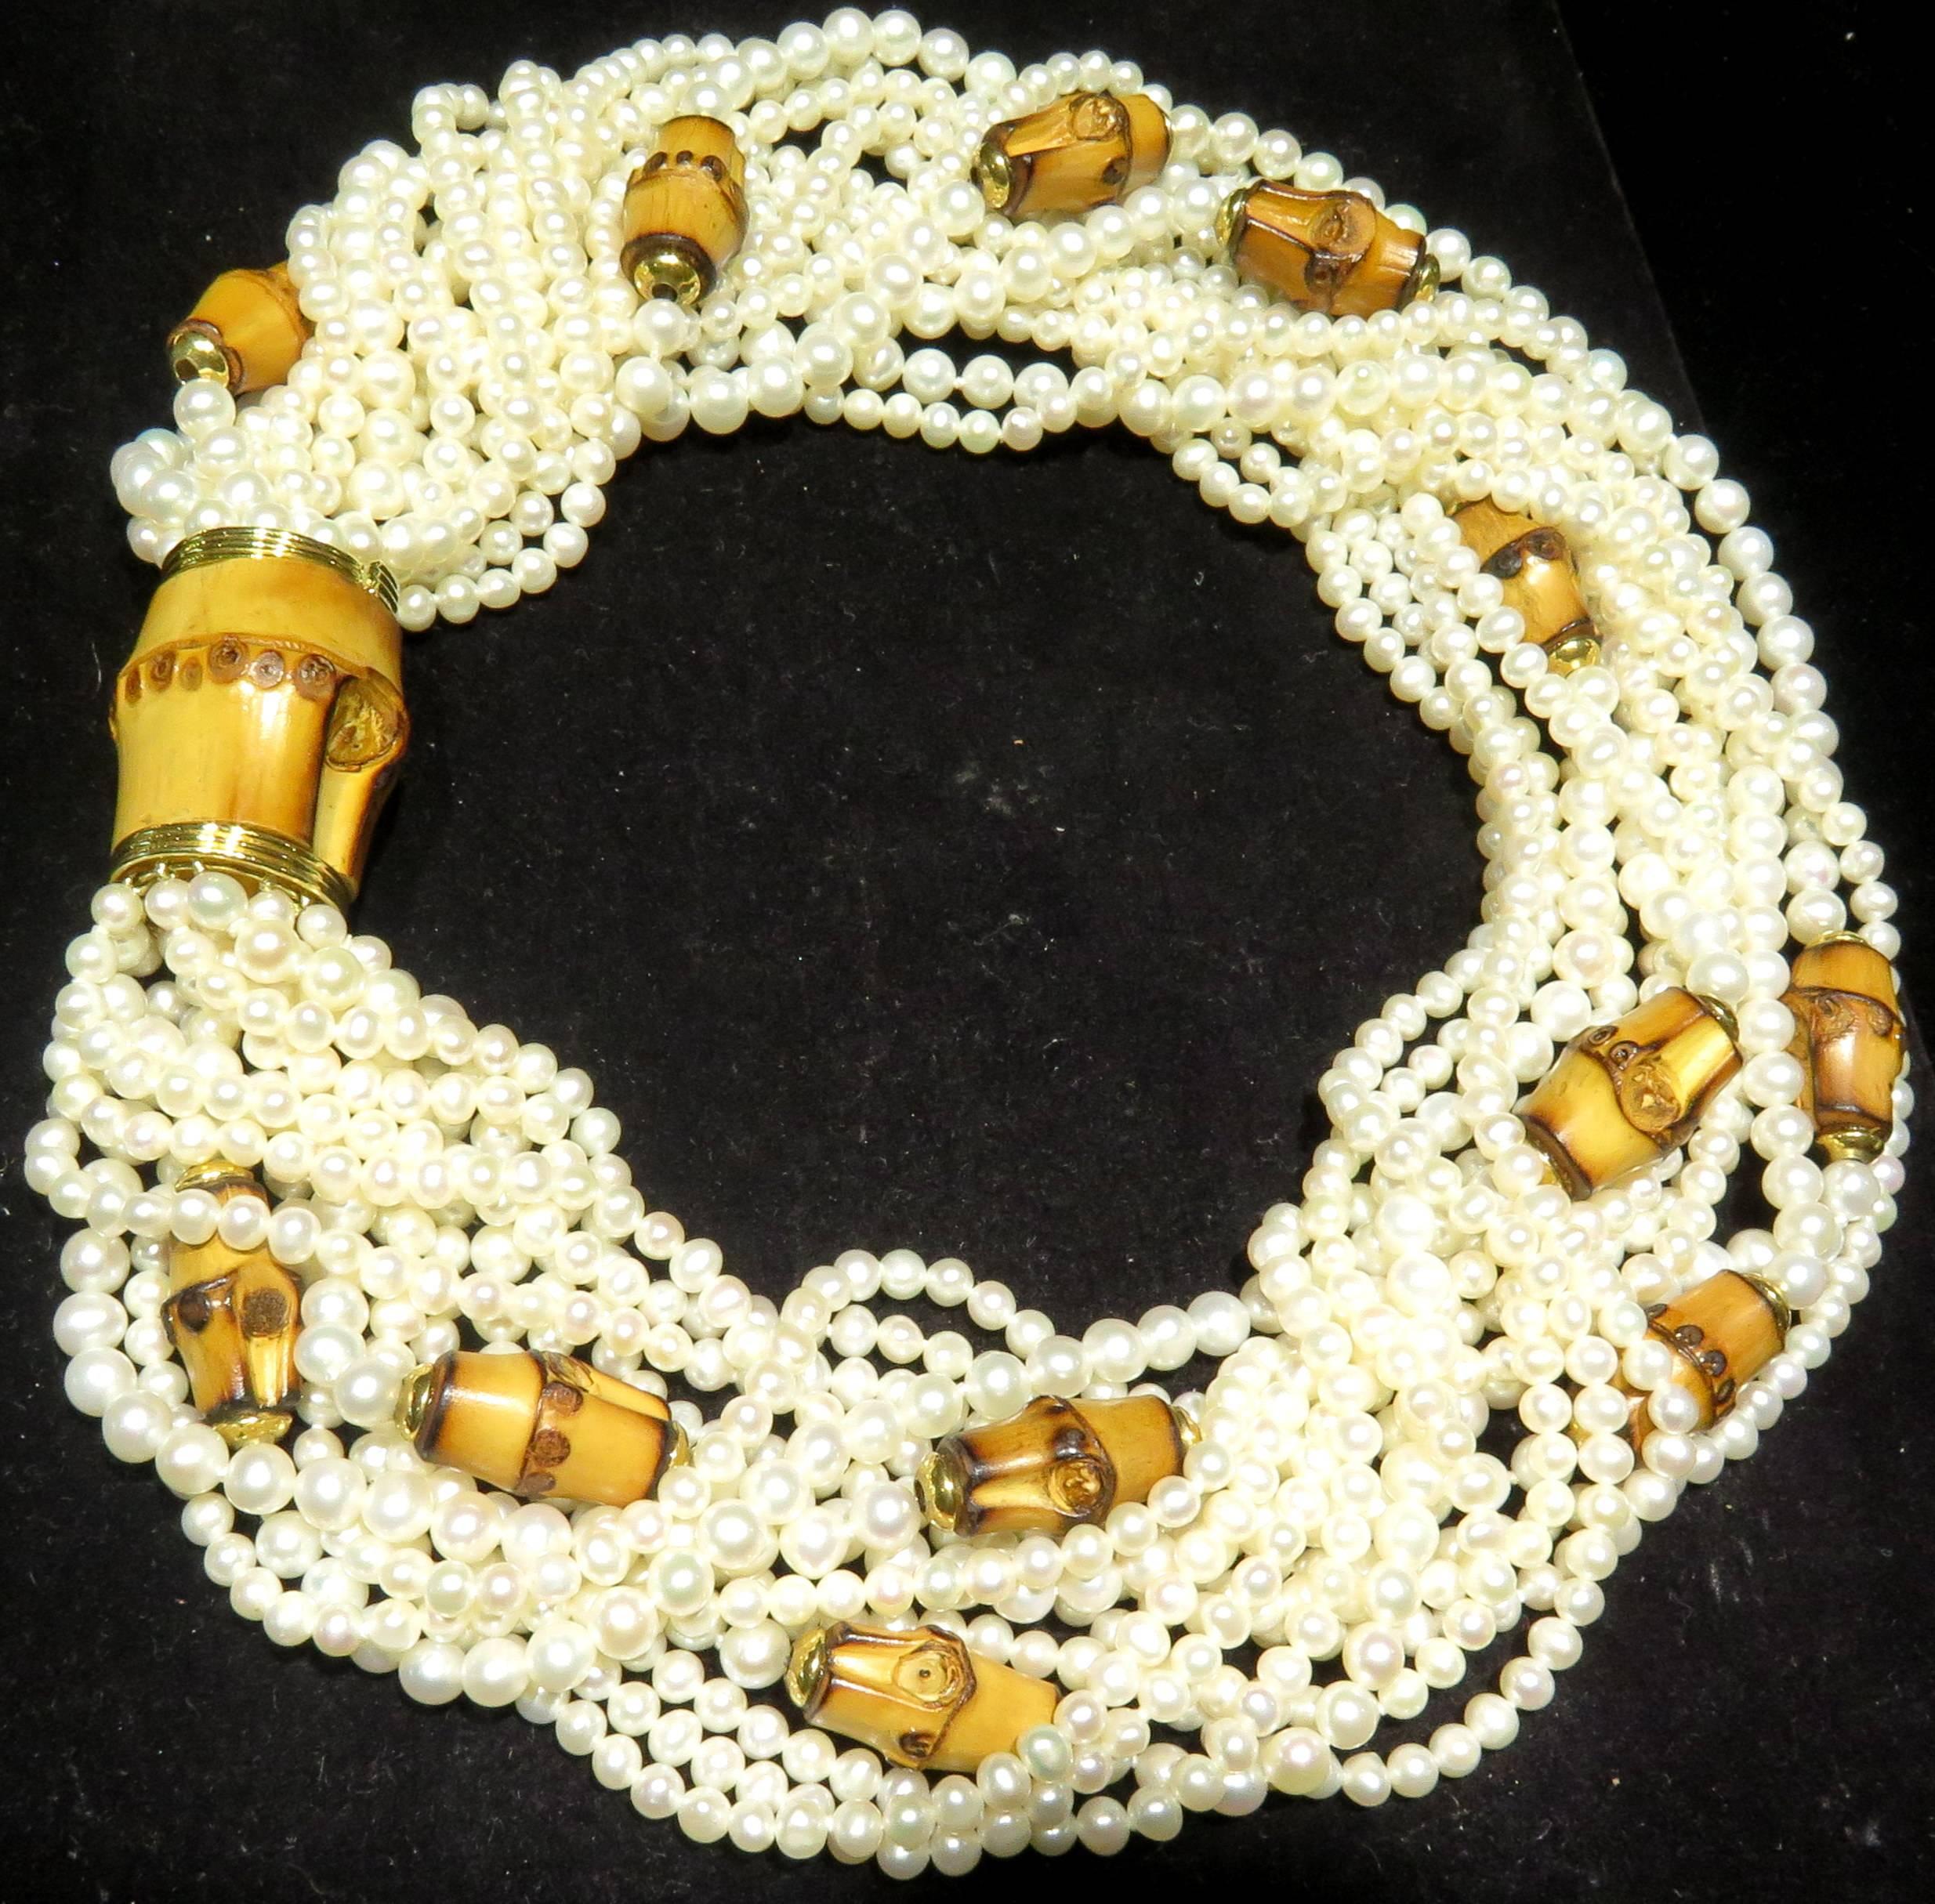 This versatile Trianon necklace is easy necklace to wear. If you want it short, you twist the strands to the desired length or if you want it long, you can untwist up to 19 1/2 inches. There are 14 strands of pearls. So easy to dress up or down this